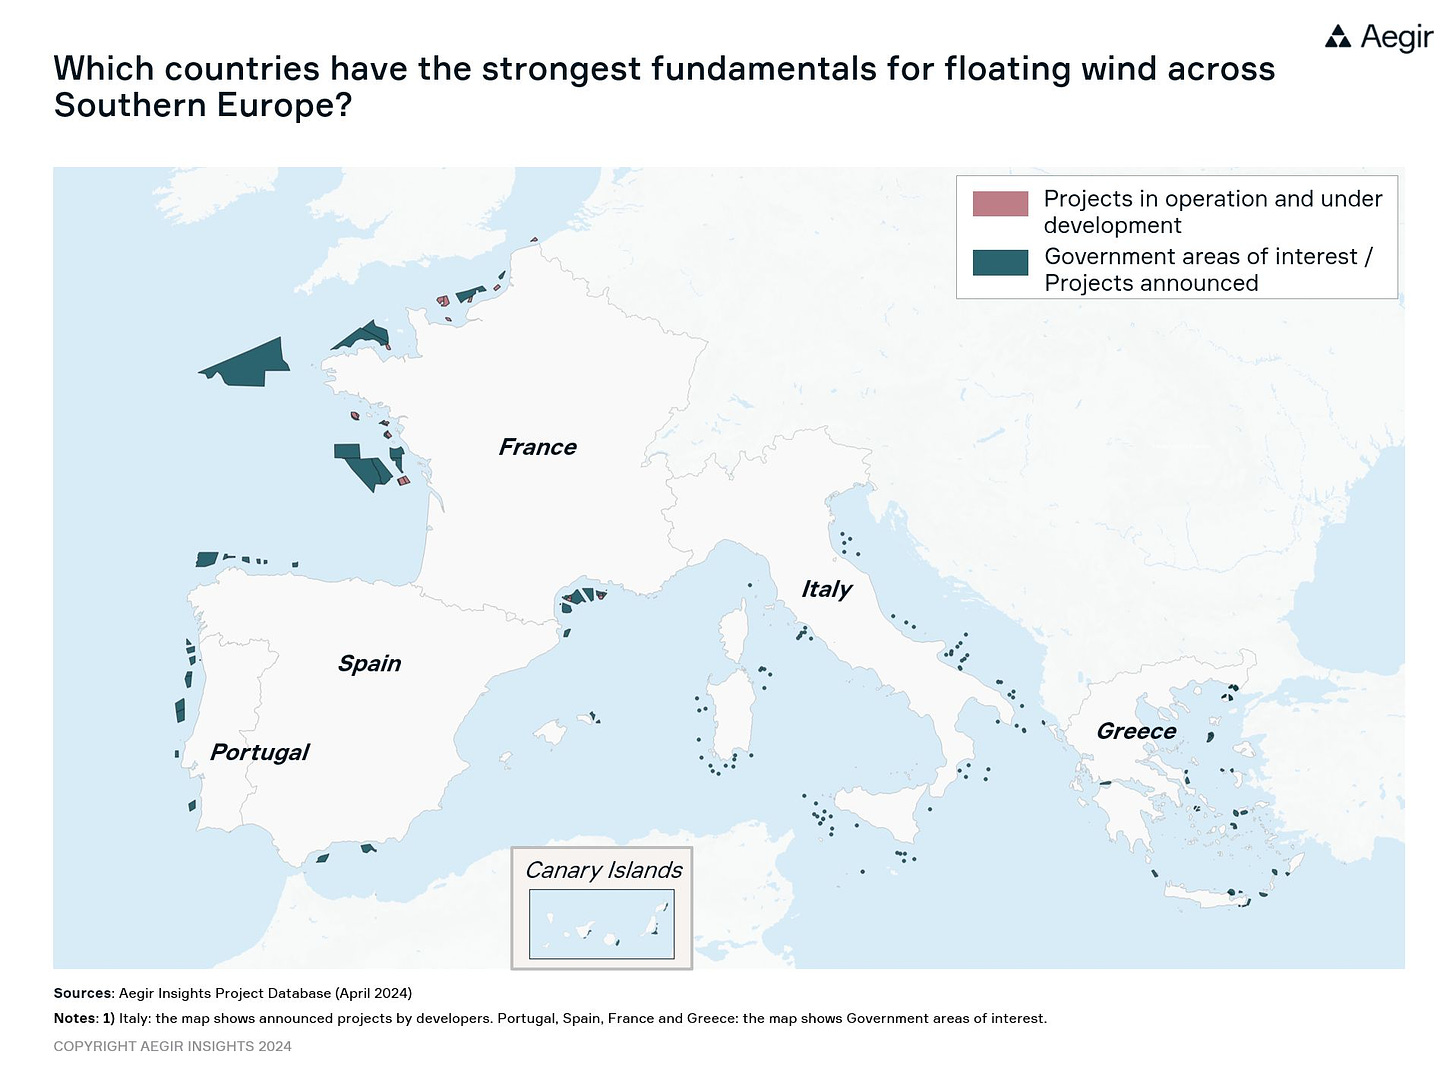 Map by Aegir Insights, showing Southern Europe and offshore wind projects either in operation/under construction or government areas of interest/project announces across Portugal, Spain, France, Italy and Greece